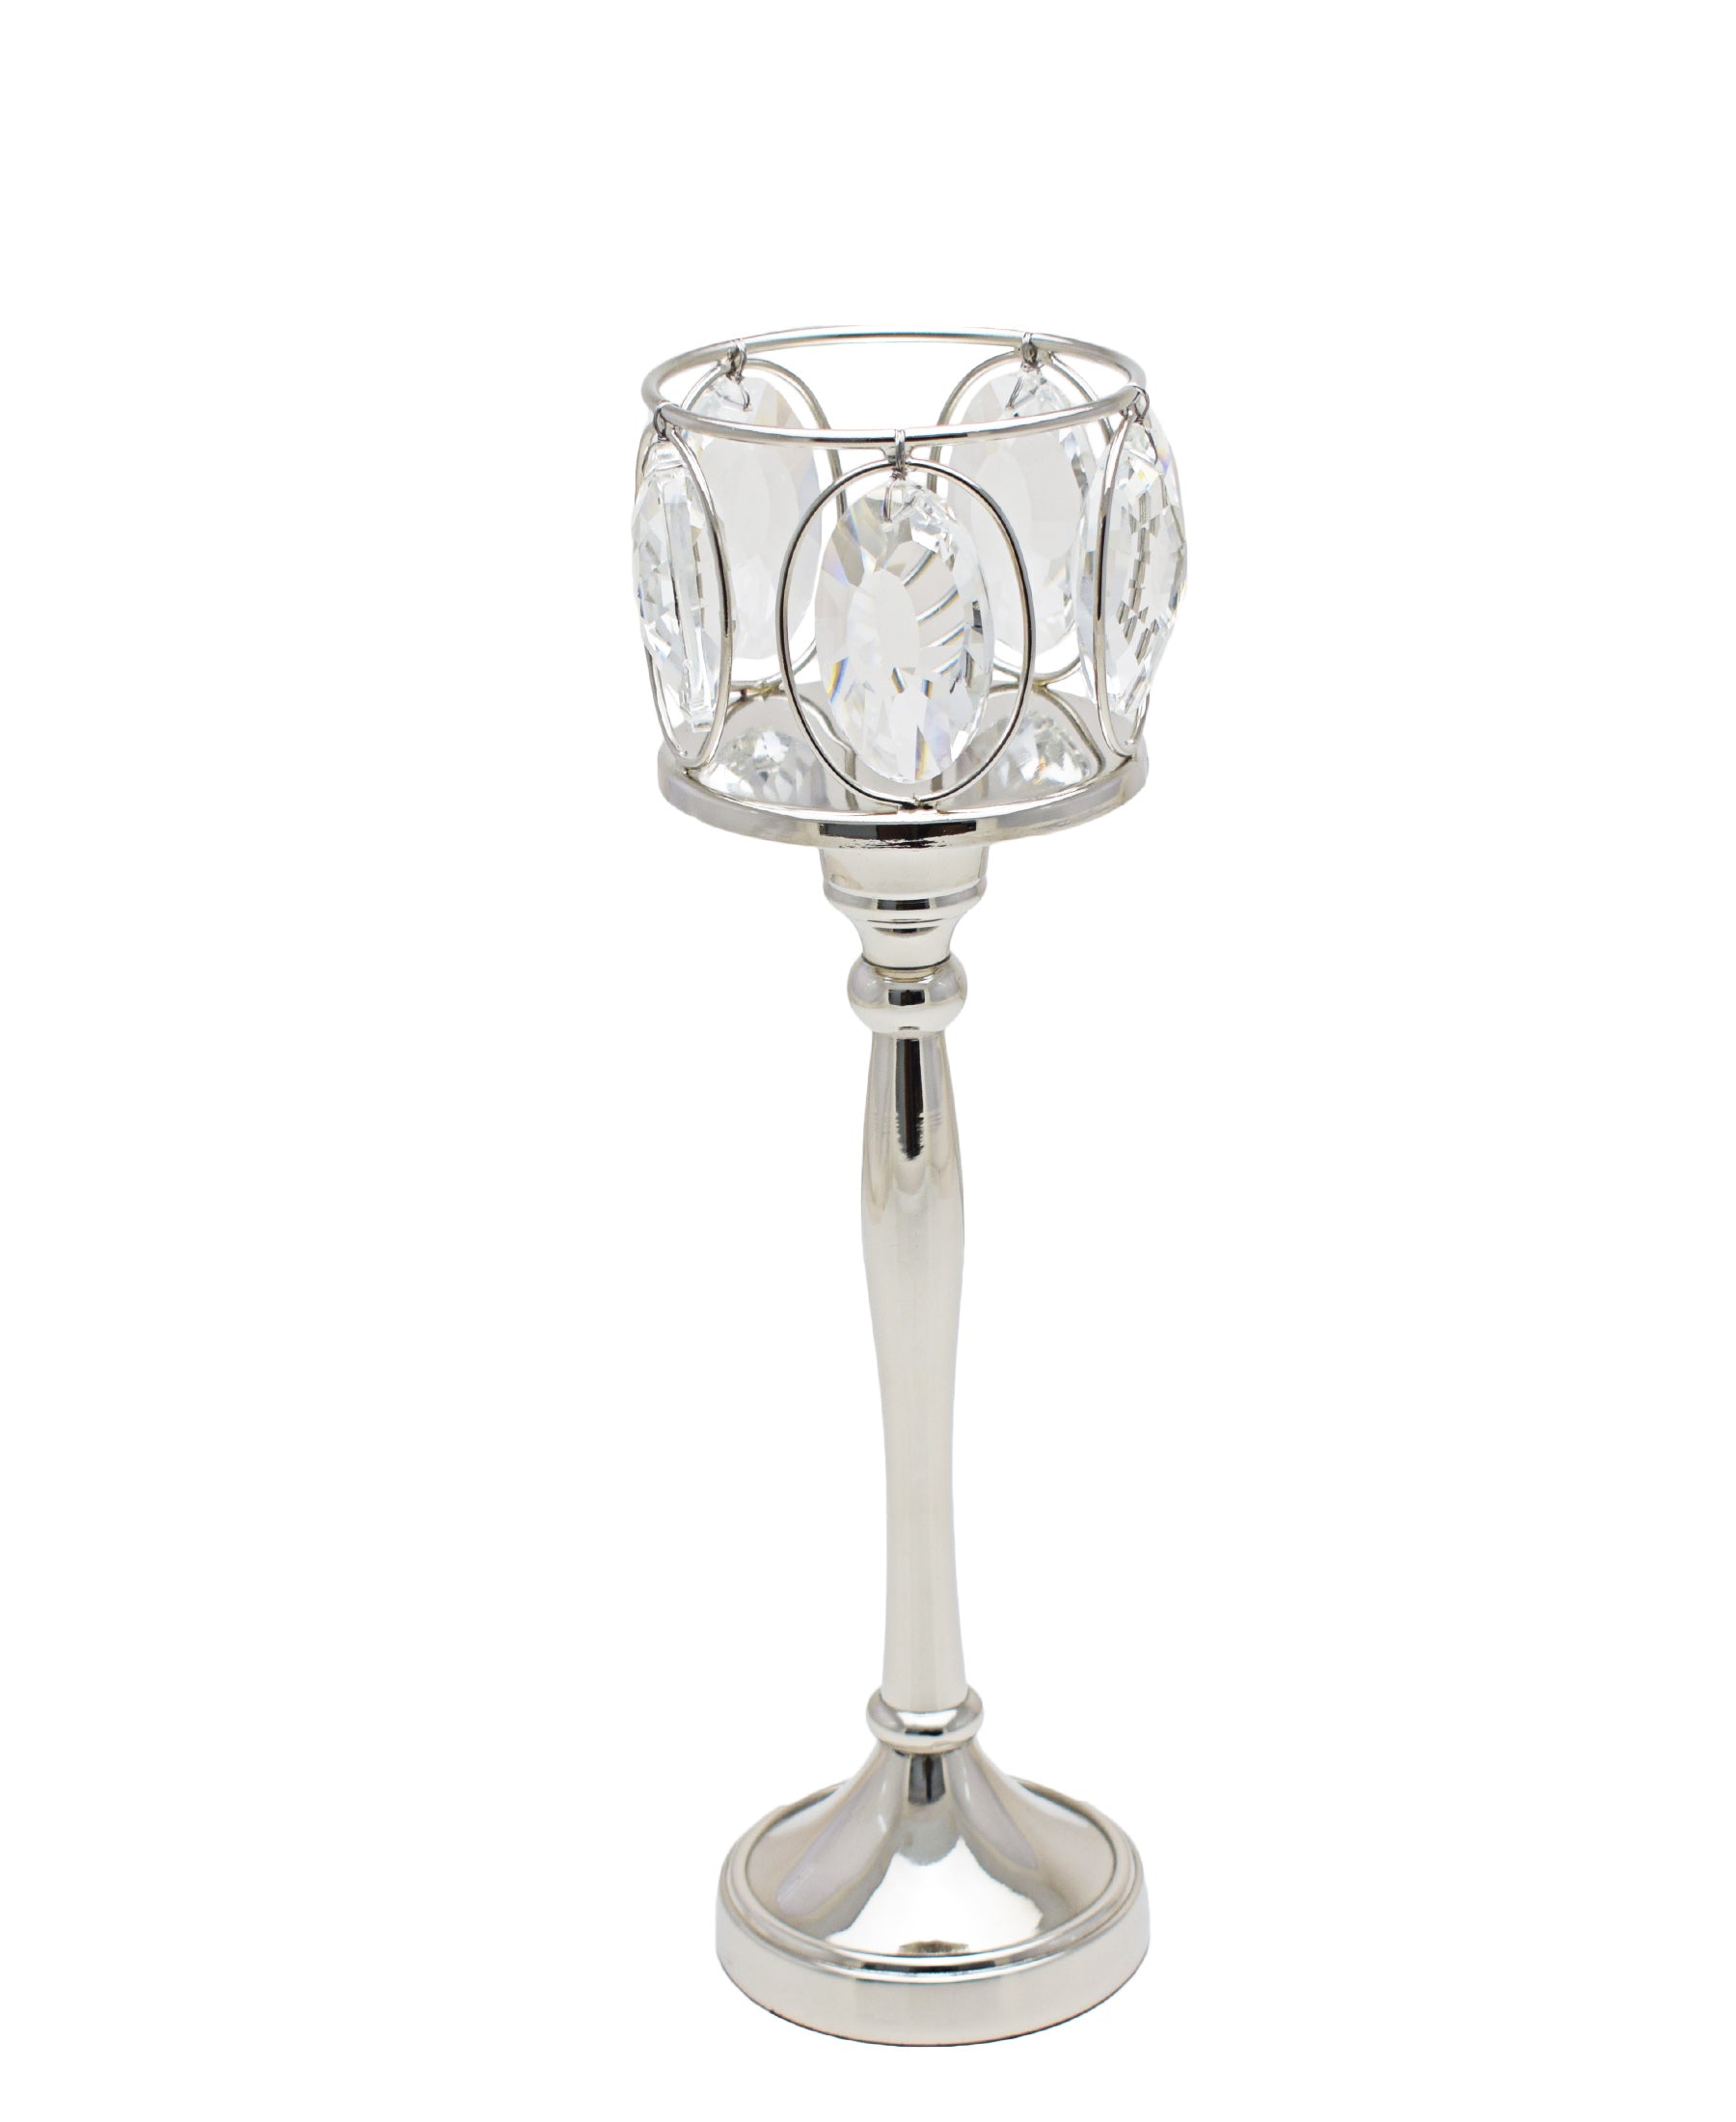 Majestic Crystal Pillar Candle Stand Large - Silver